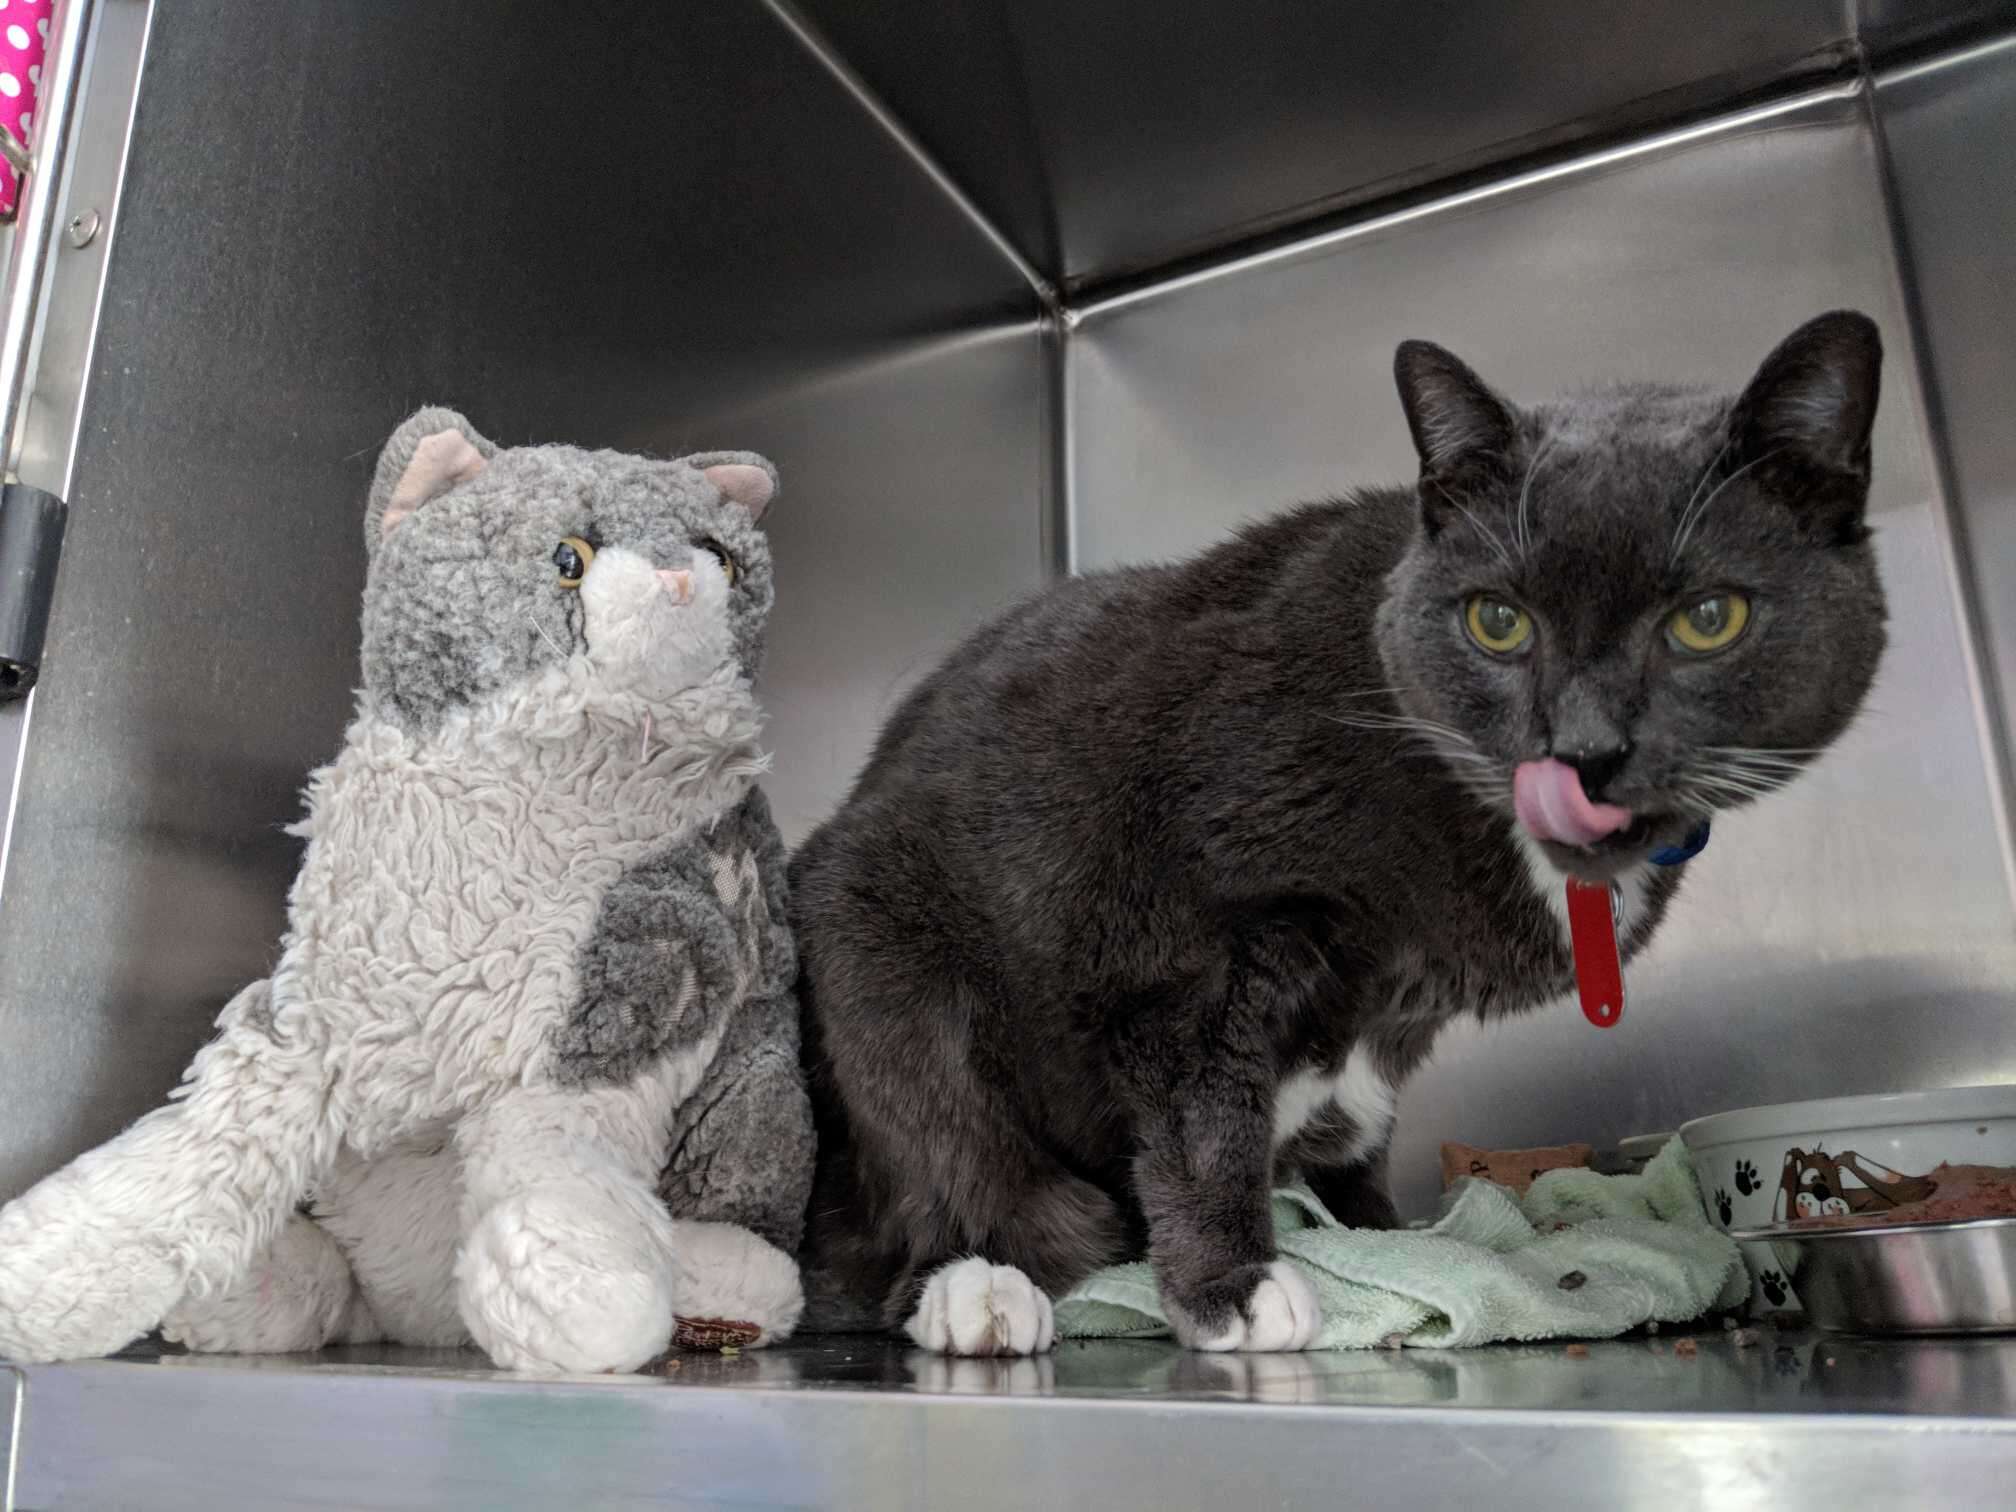 Cat and stuffed animal at shelter